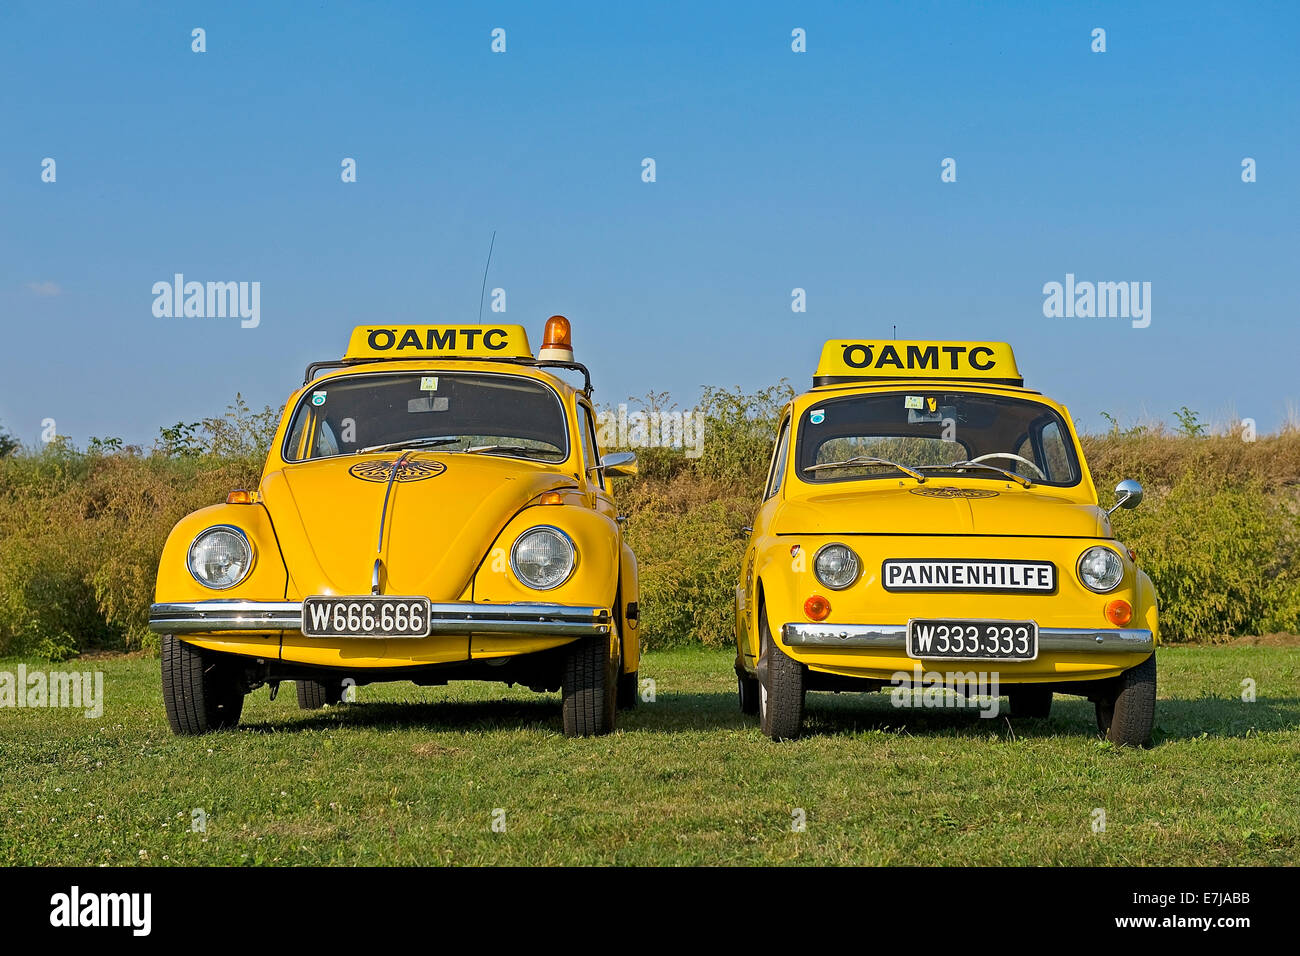 ÖAMTC breakdown assistance, vintage Volkswagen and Puch cars Stock Photo